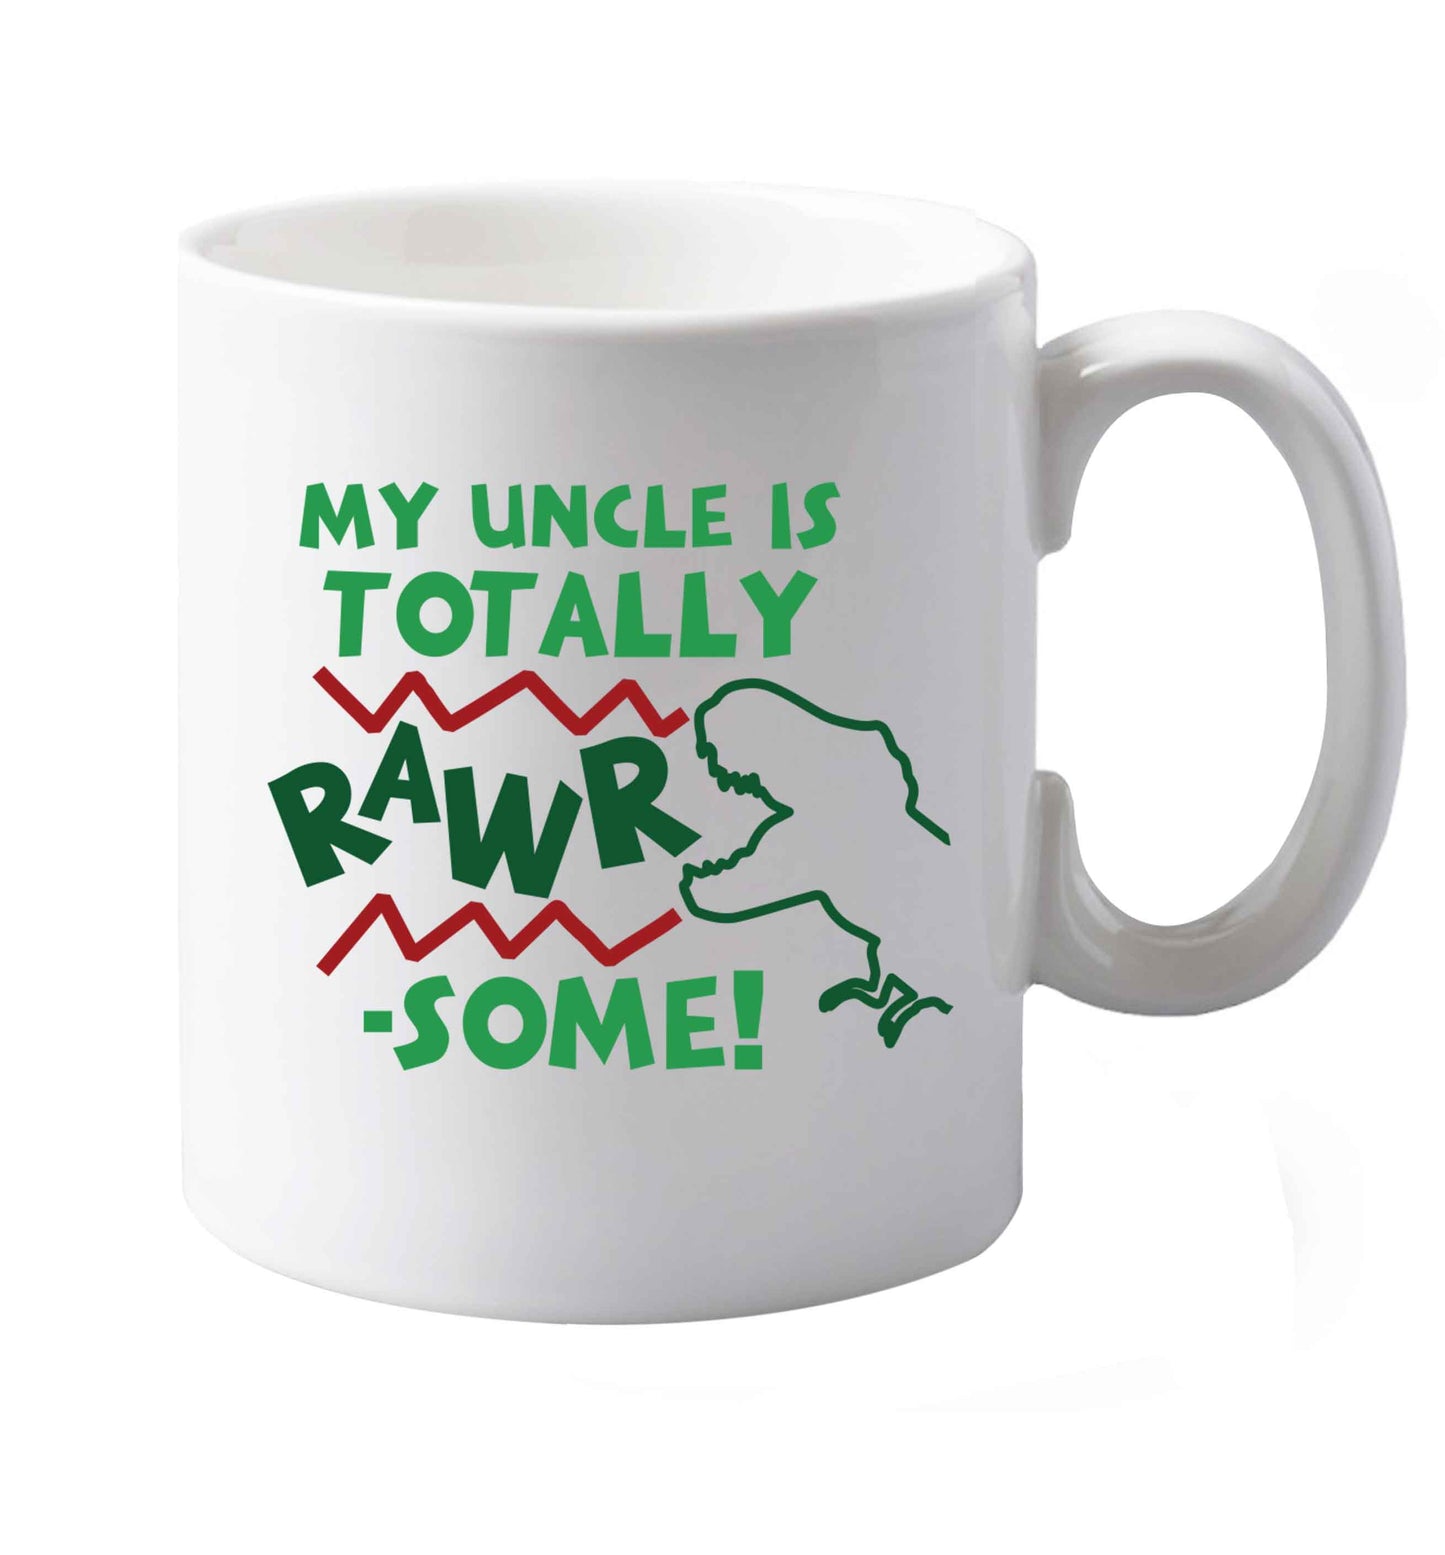 10 oz My uncle is totally rawrsome ceramic mug both sides